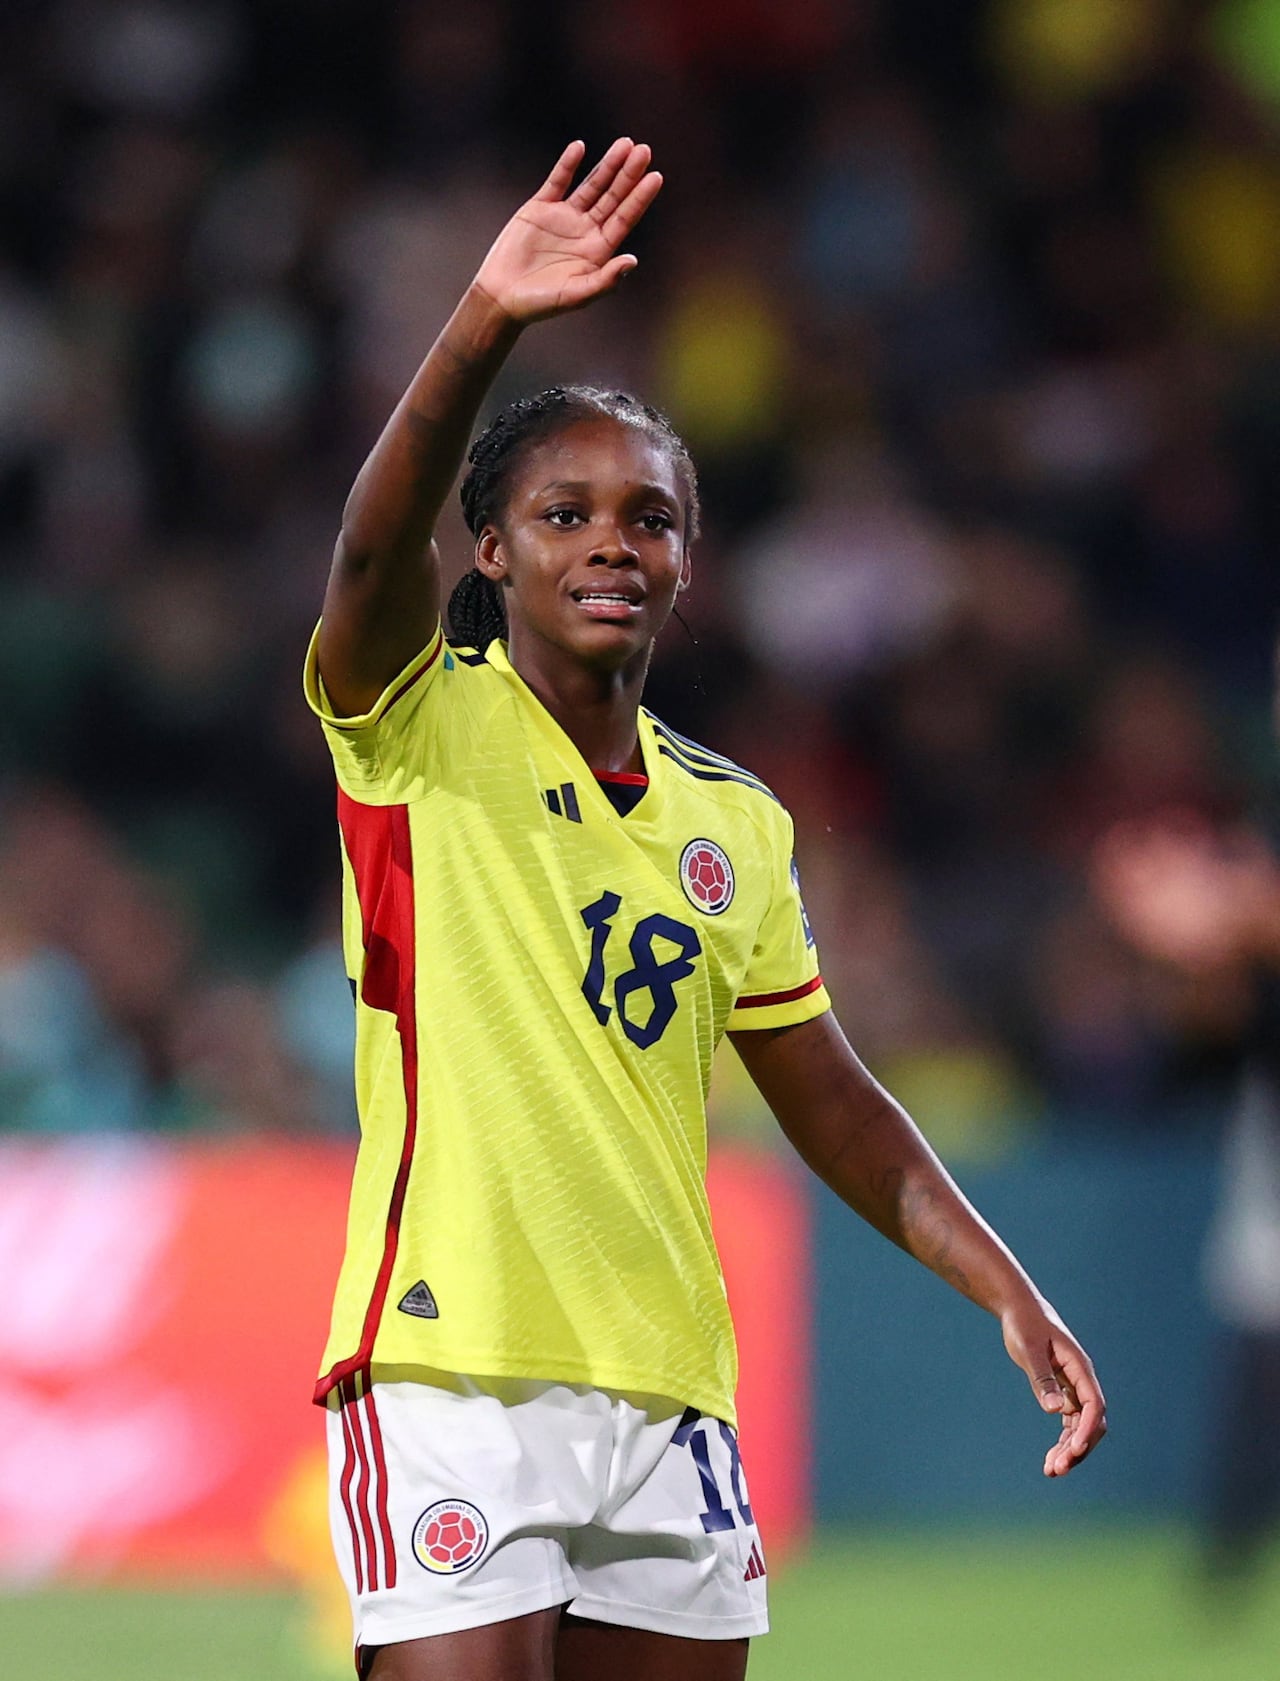 Soccer Football - FIFA Women’s World Cup Australia and New Zealand 2023 - Group H - Morocco v Colombia - Perth Rectangular Stadium, Perth, Australia - August 3, 2023 Colombia's Linda Caicedo reacts REUTERS/Luisa Gonzalez